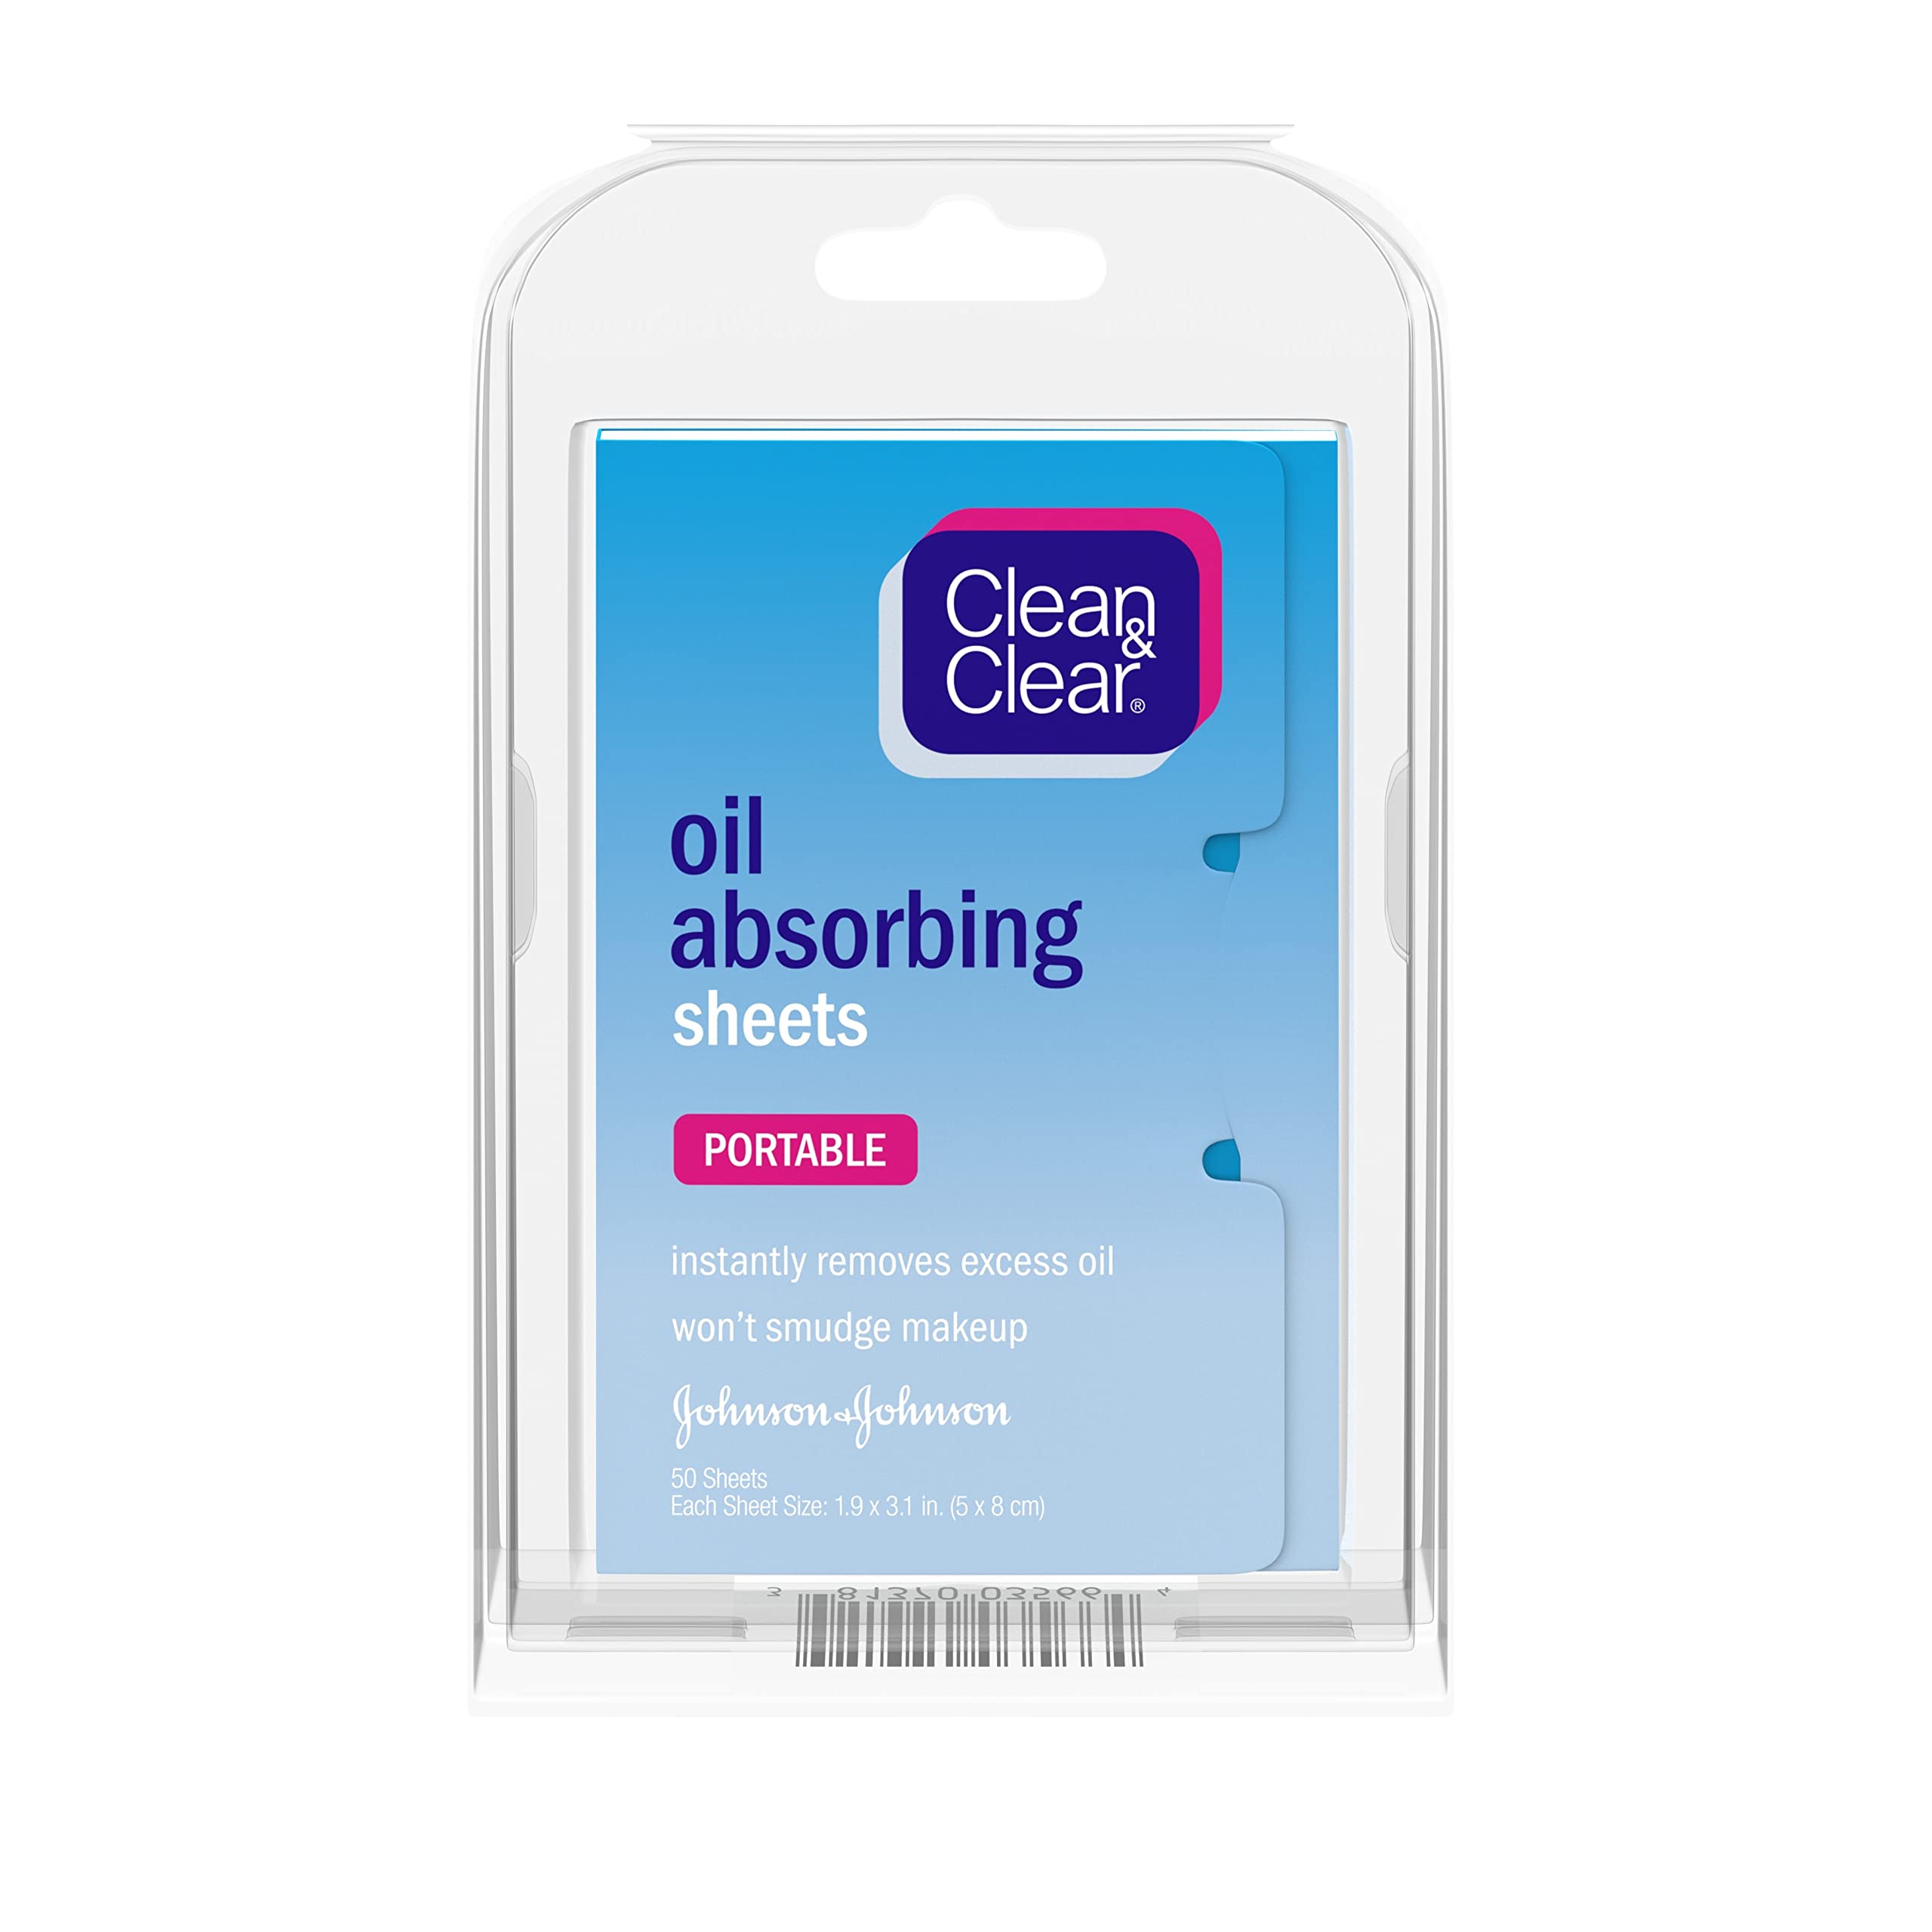 Clean & Clear Oil Absorbing Facial Sheets, Portable Blotting Papers for Face & Nose, Blotting Sheets for Oily Skin to Instantly Remove Excess Oil & Shine, Absorbing Blotting Papers, 50 ct (Pack of 6)